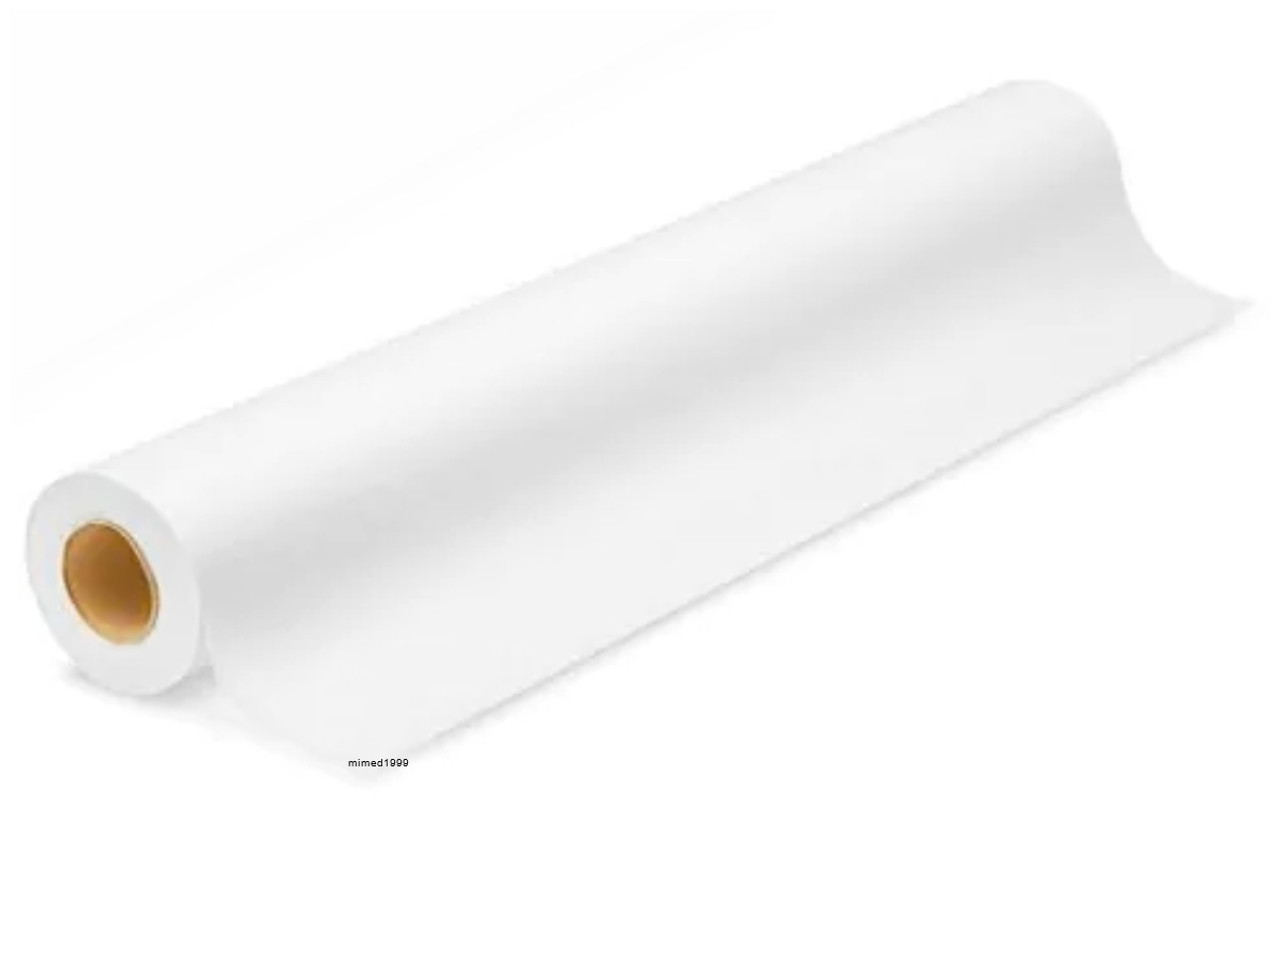 Avalon Papers 517 Exam Table Paper, Standard Smooth, 21 x 225', White (Pack  of 12)